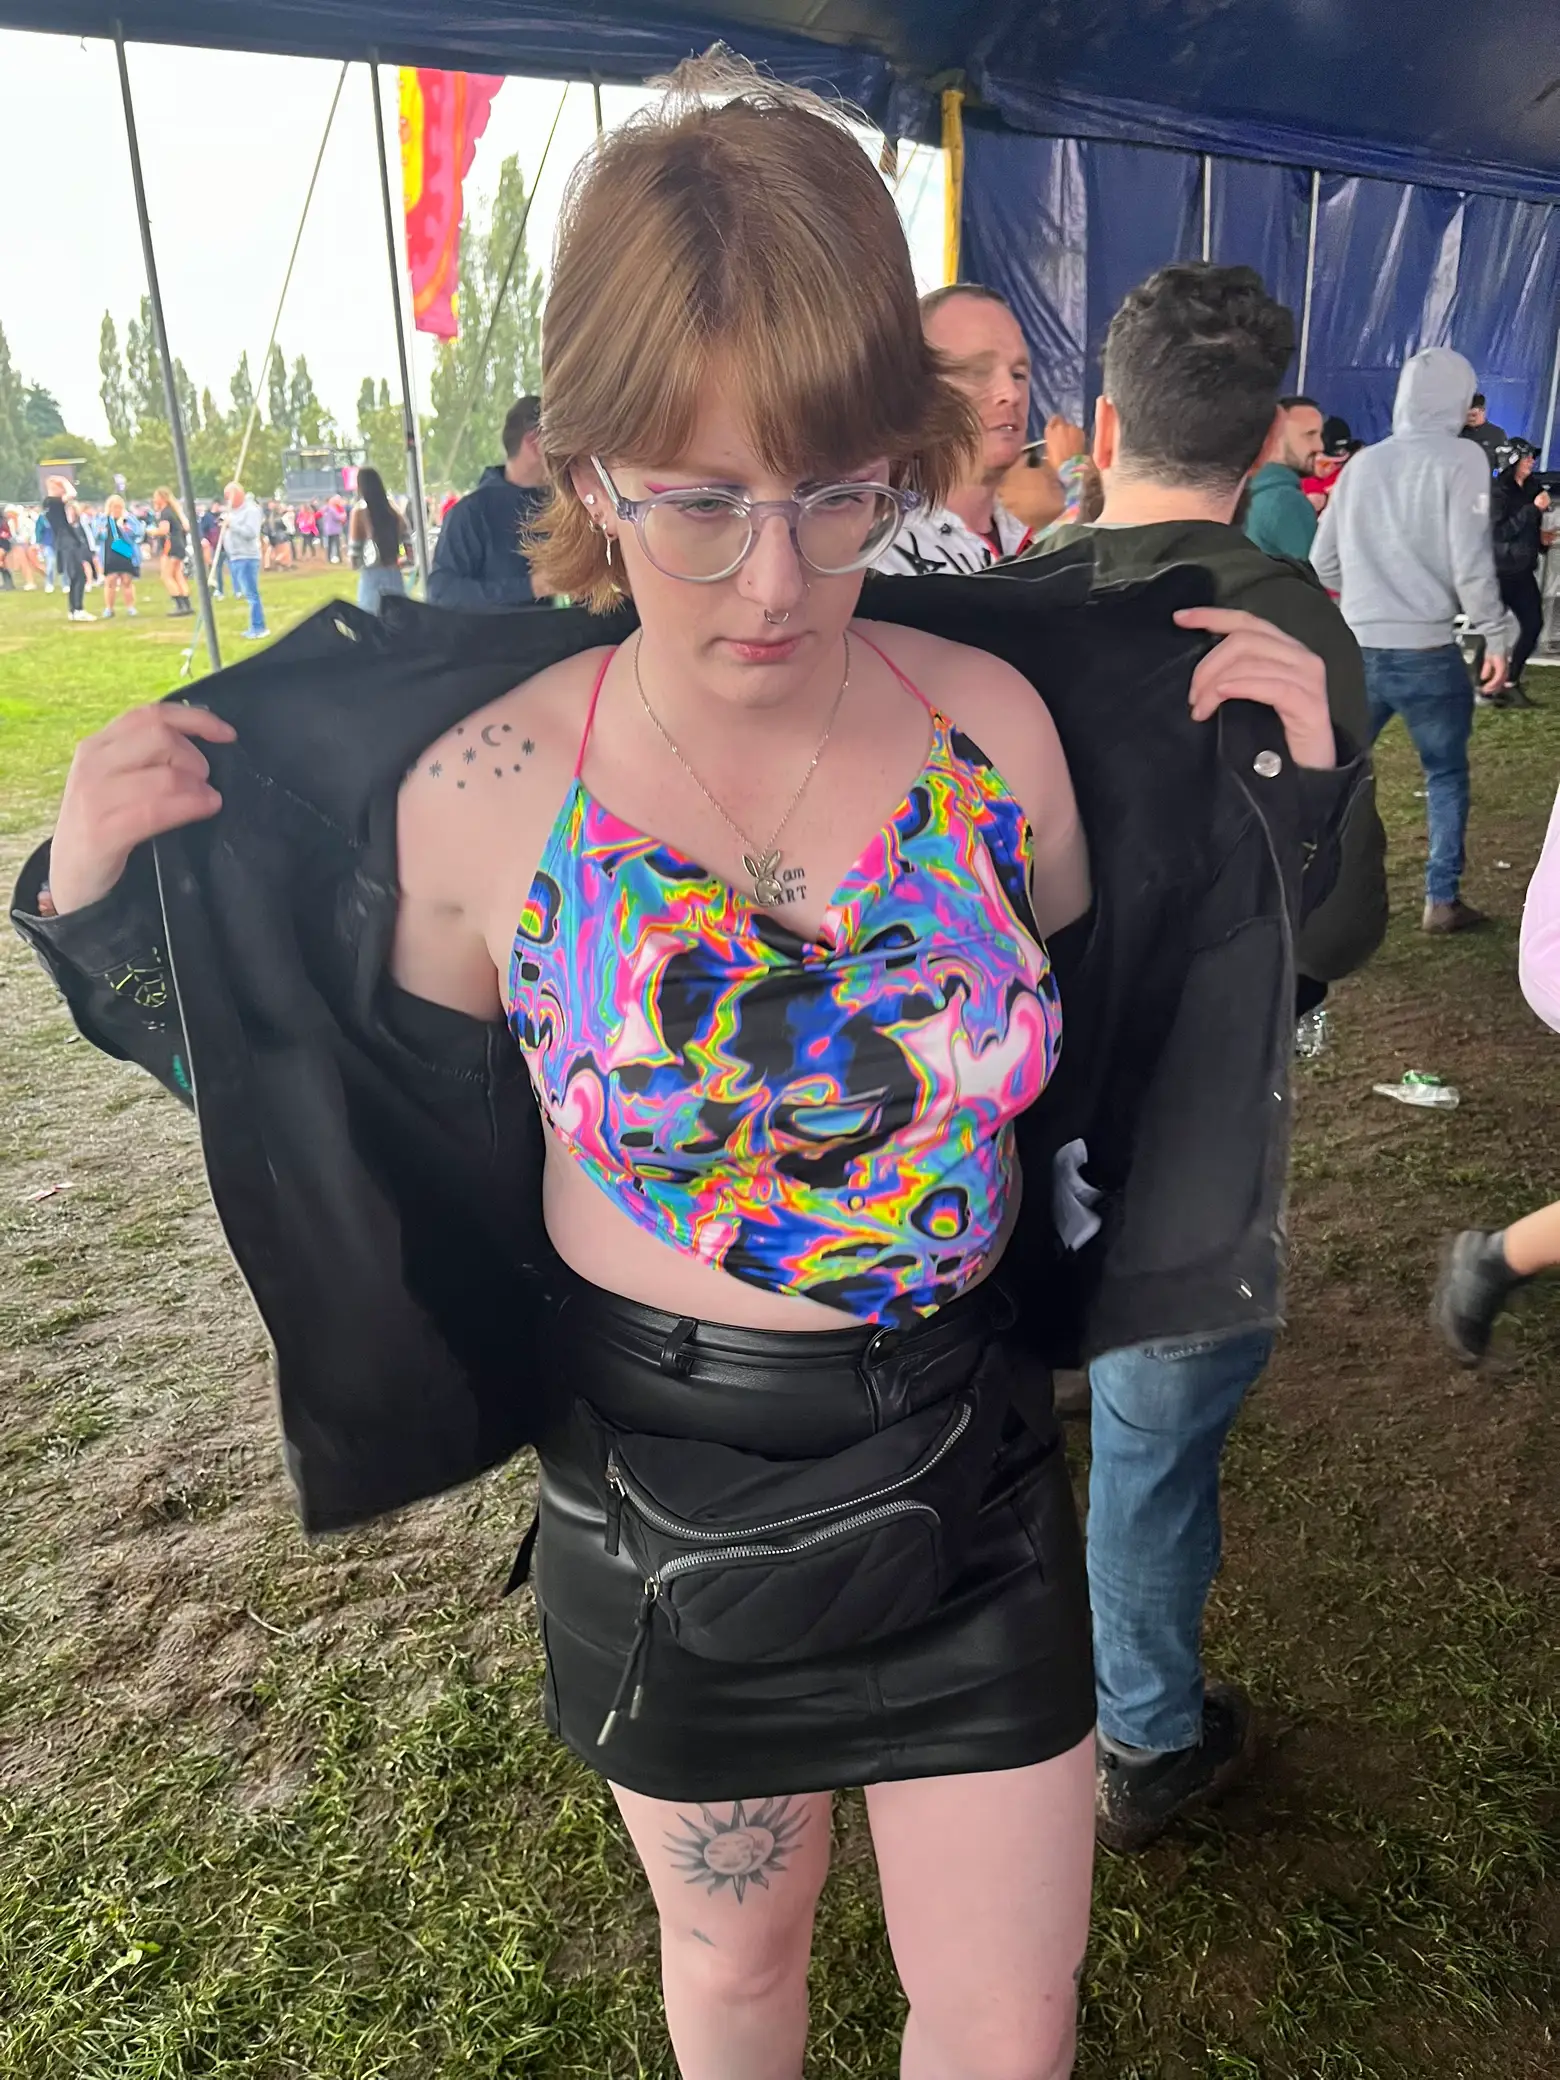 Iheartraves set top is size XL and bottoms are a - Depop